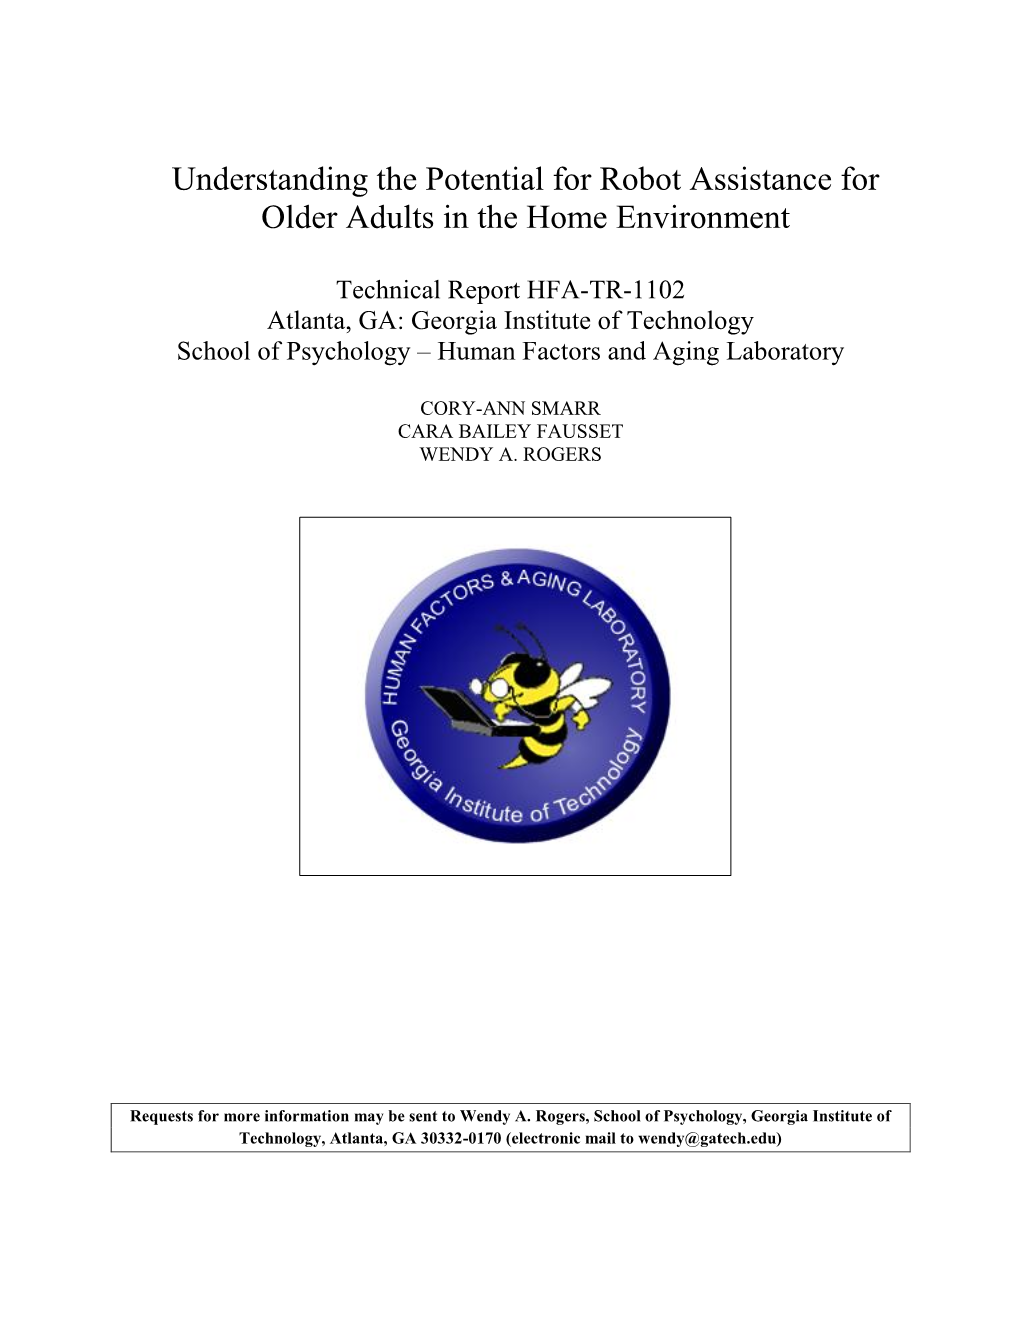 Understanding the Potential for Robot Assistance for Older Adults in the Home Environment